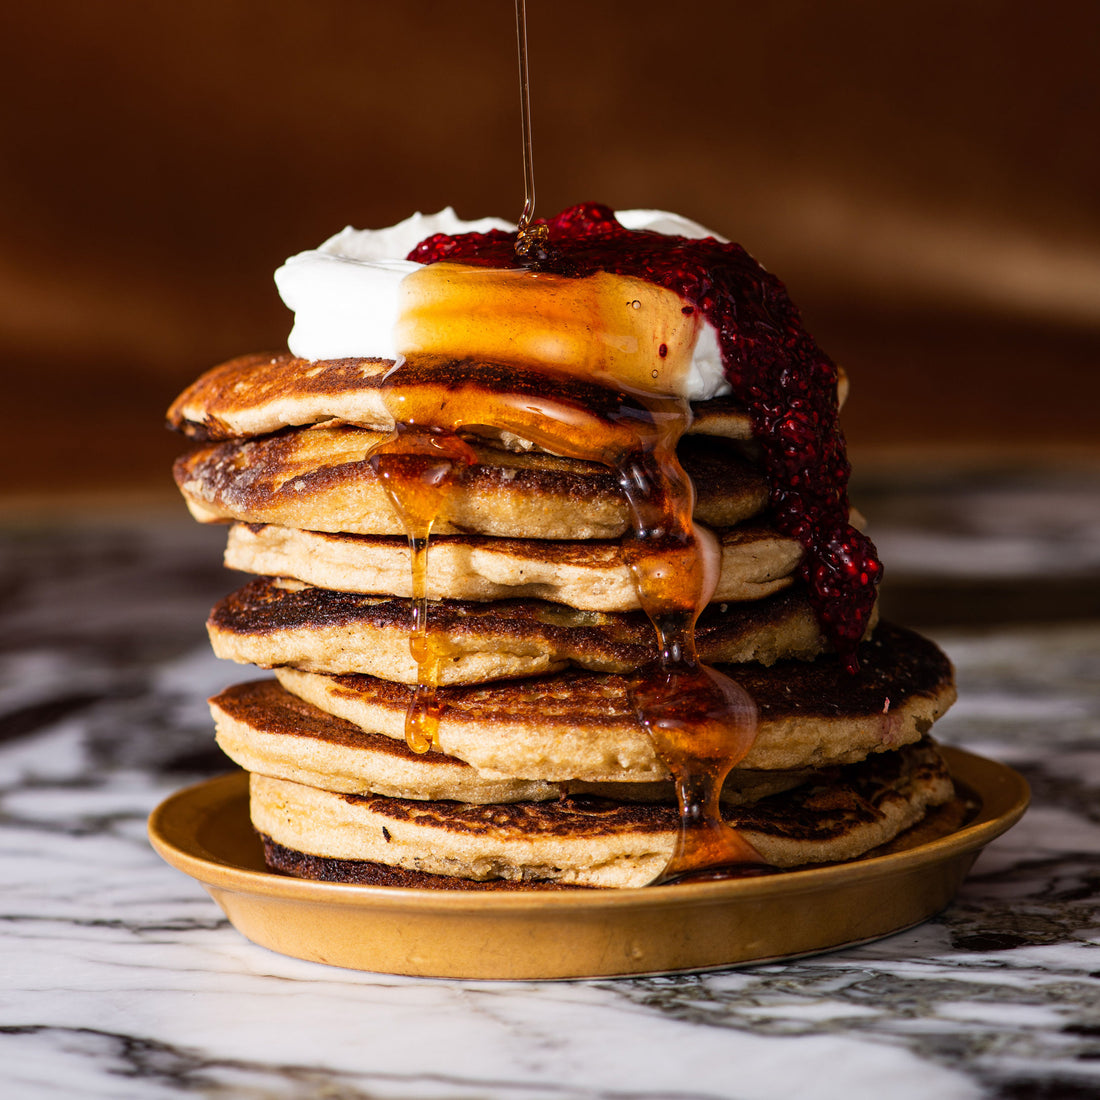 Meet your new forever pancakes…